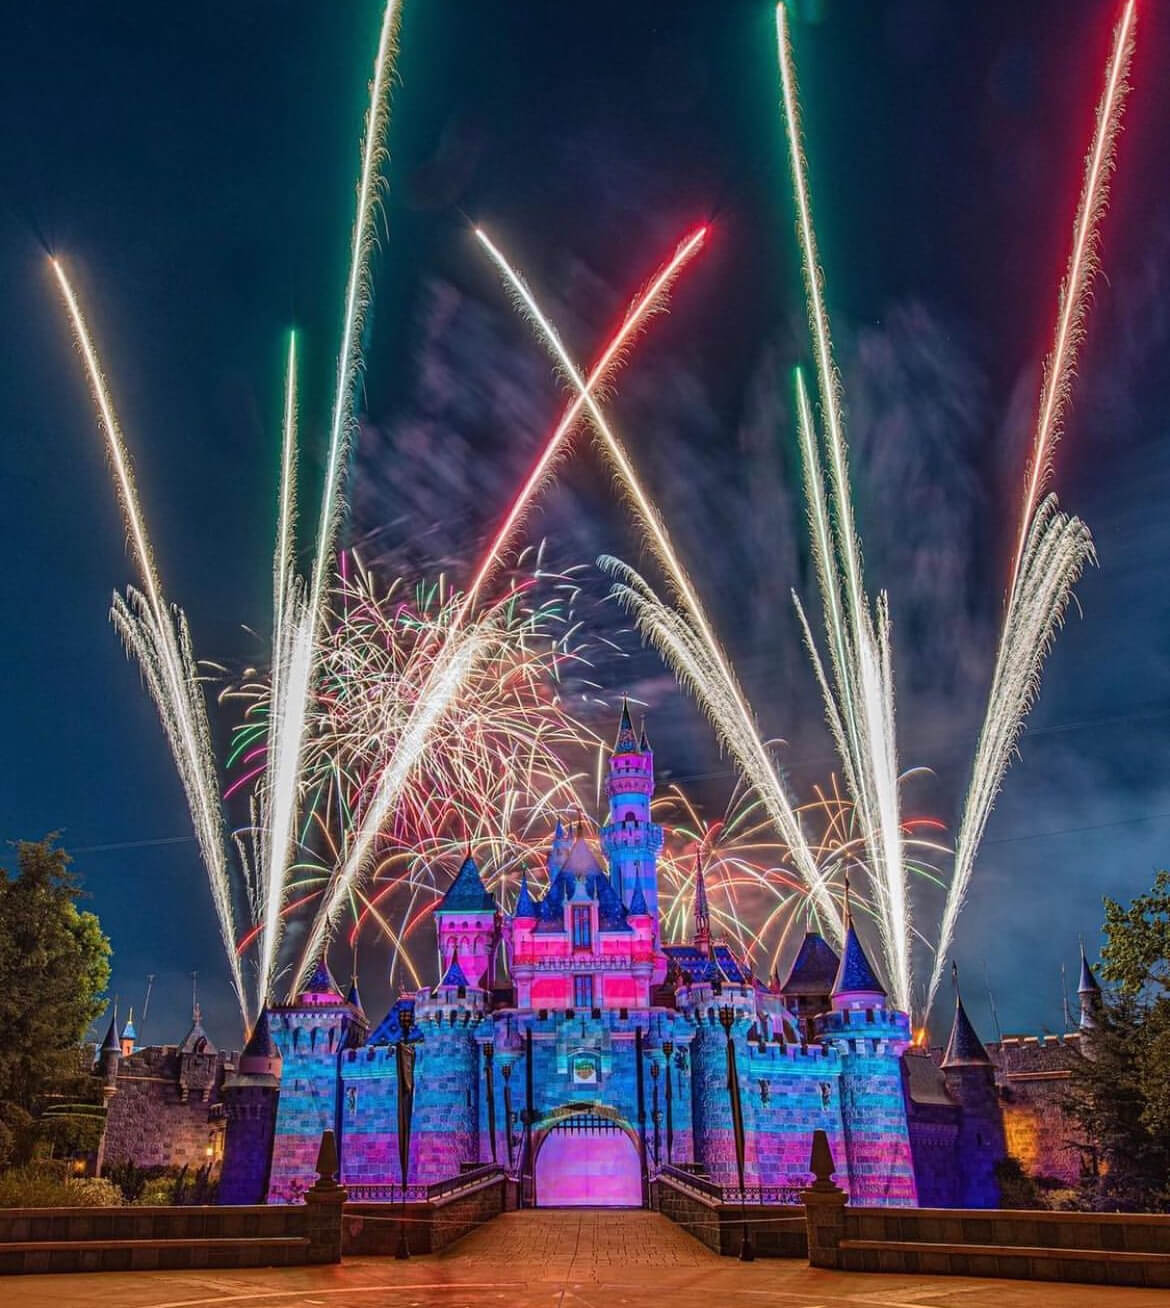 Another fireworks display at Disneyland.